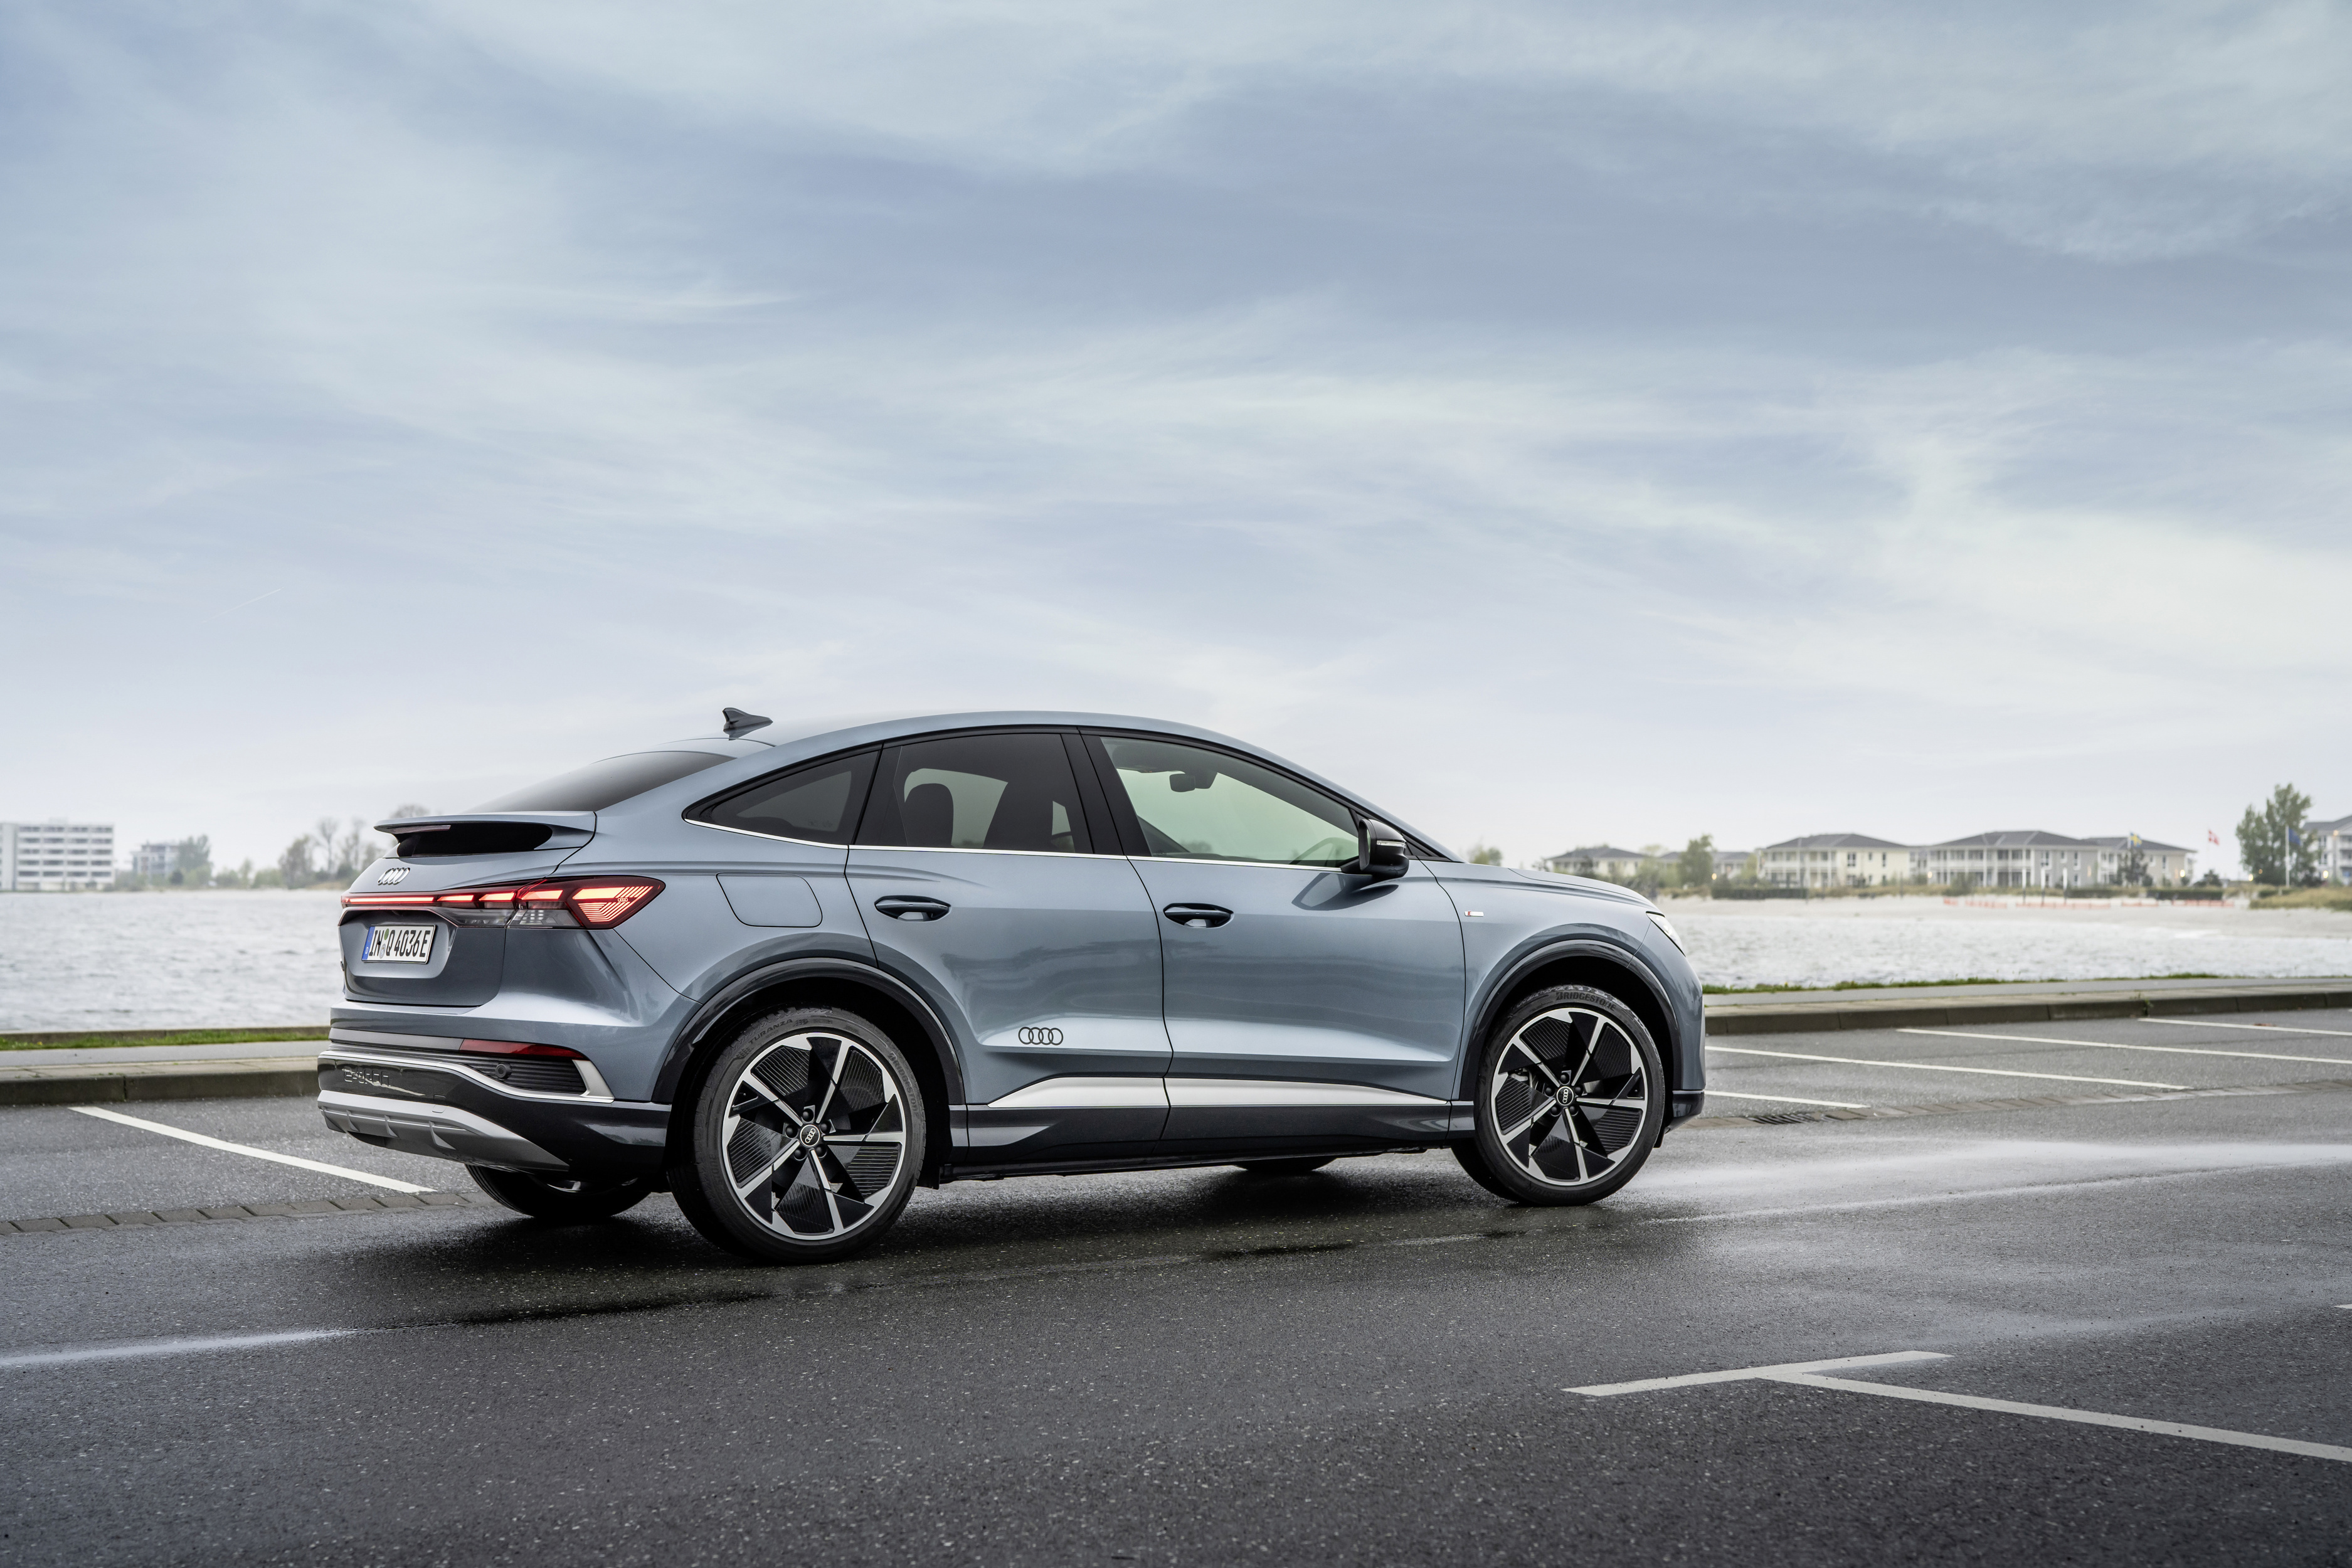 Range and power boost for updated Audi Q4 e-tron